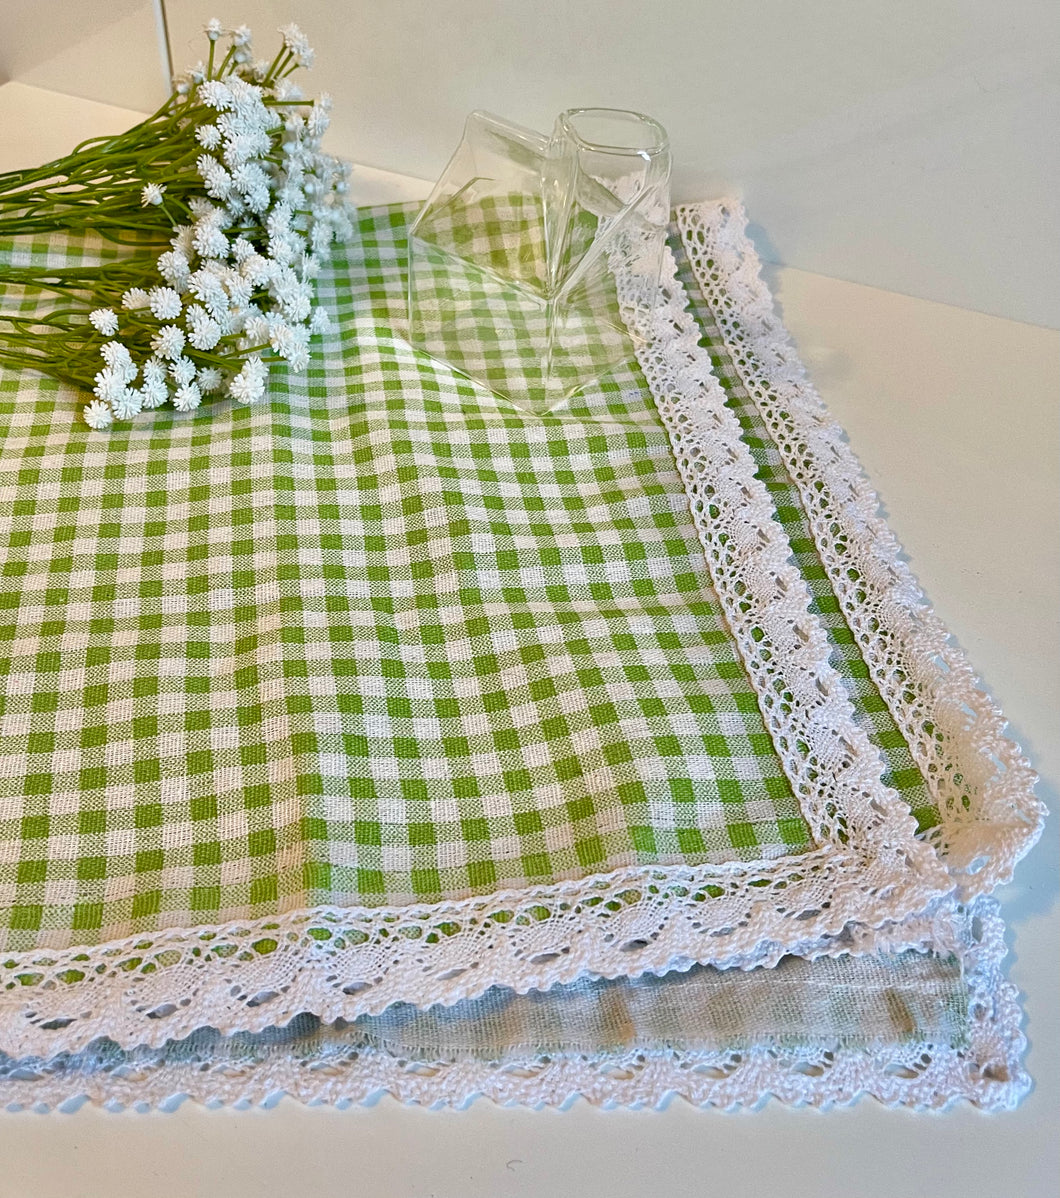 Vintage Lace Checkered picnic Blanket